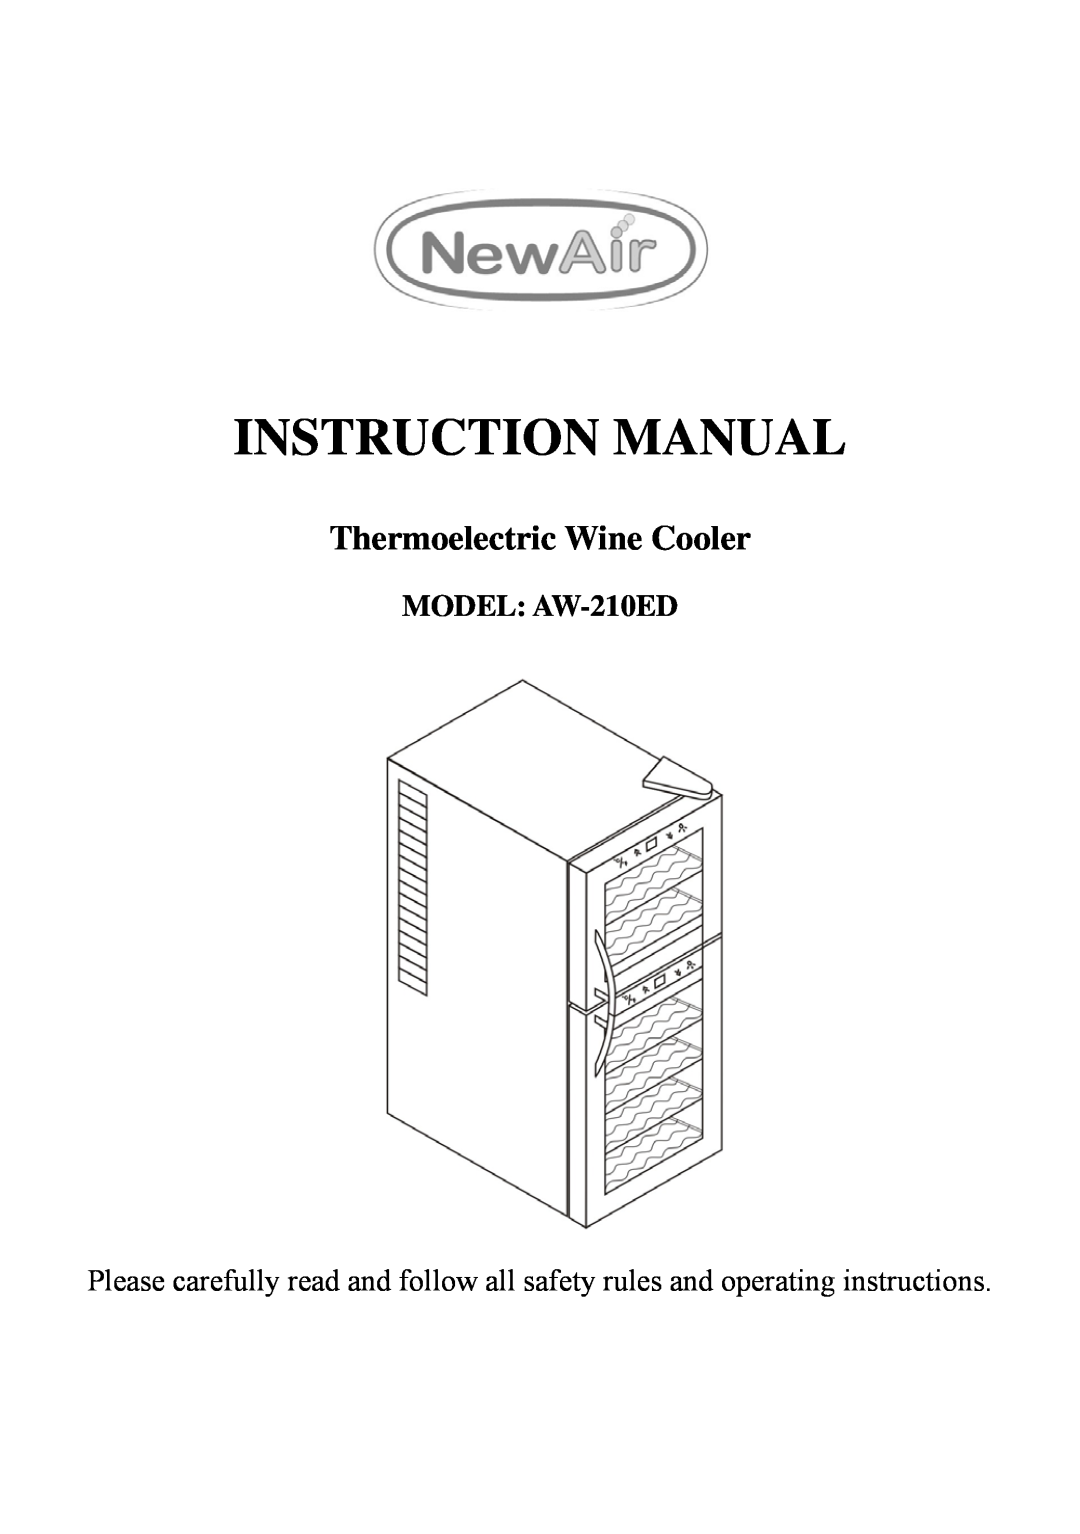 NewAir instruction manual MODEL AW-210ED, Thermoelectric Wine Cooler 